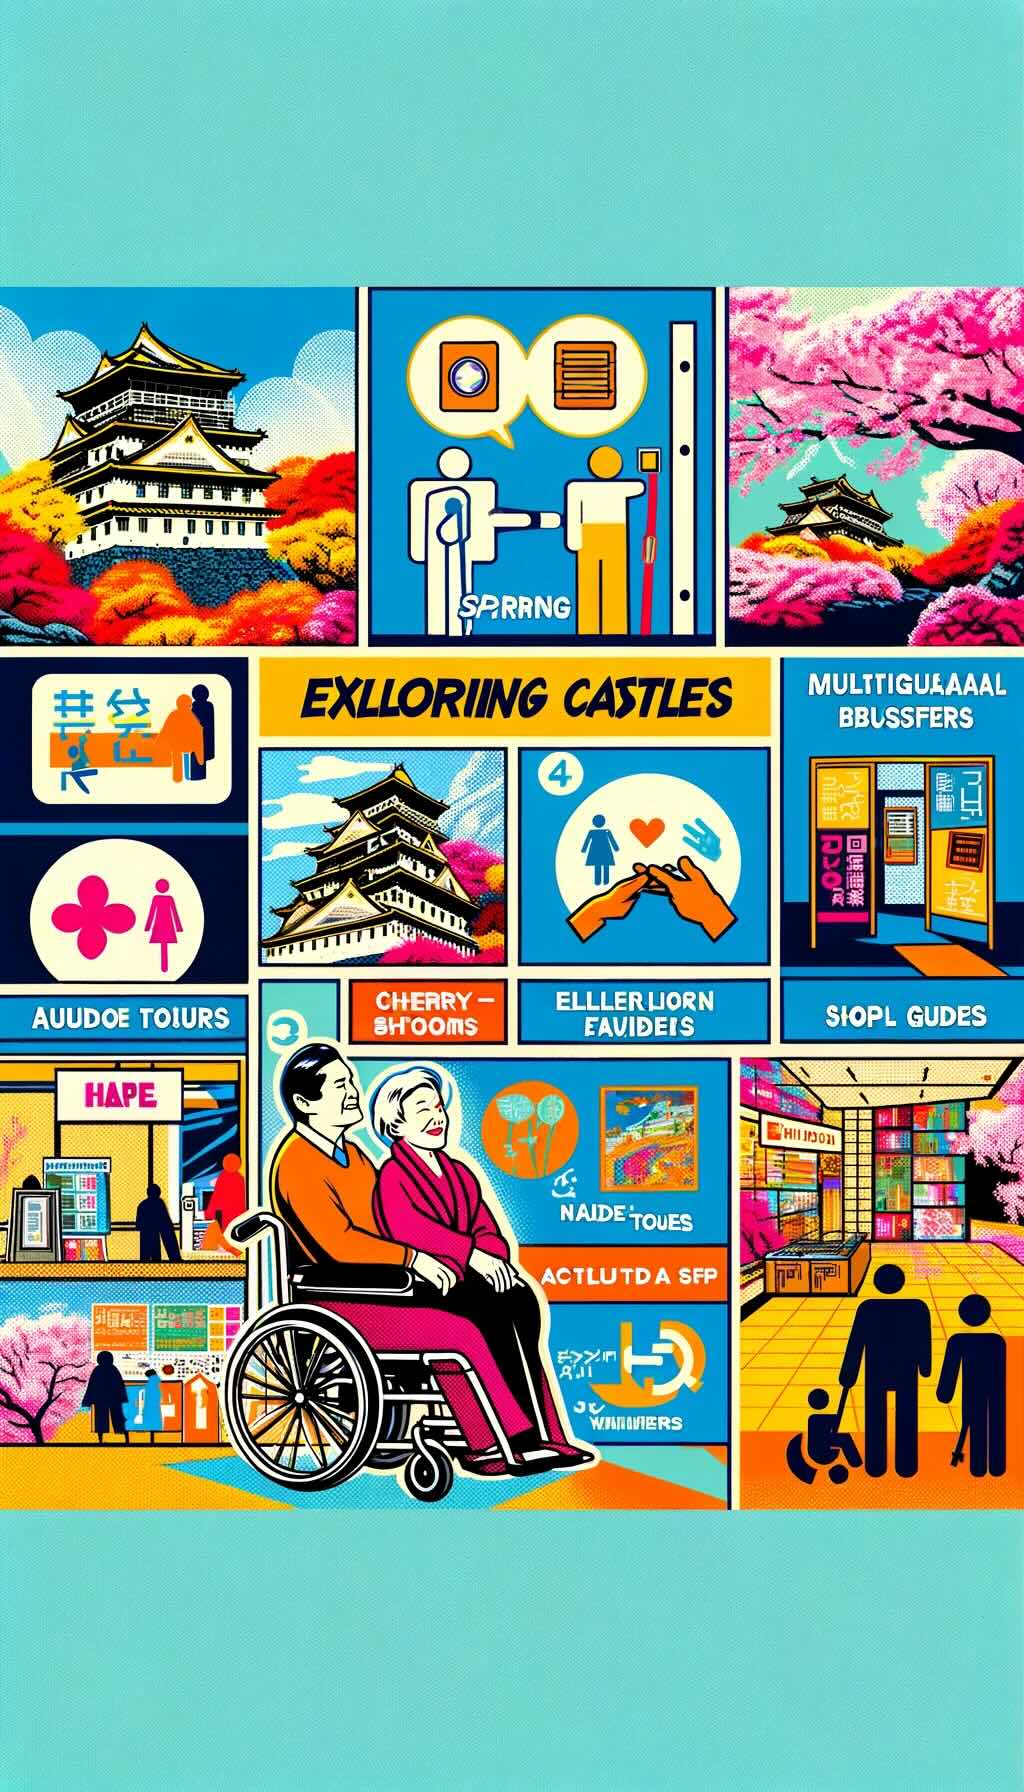 Practical tips for exploring castles in Japan. The image vividly illustrates the best times to visit, with tourists enjoying cherry blossoms in spring and autumn foliage. It also highlights accessibility features for elderly or differently-abled visitors and showcases amenities like guided tours, audio guides, multilingual brochures, shops, cafes, and restrooms, making it a vibrant and informative guide for a comfortable and enriching castle exploration experience in Japan